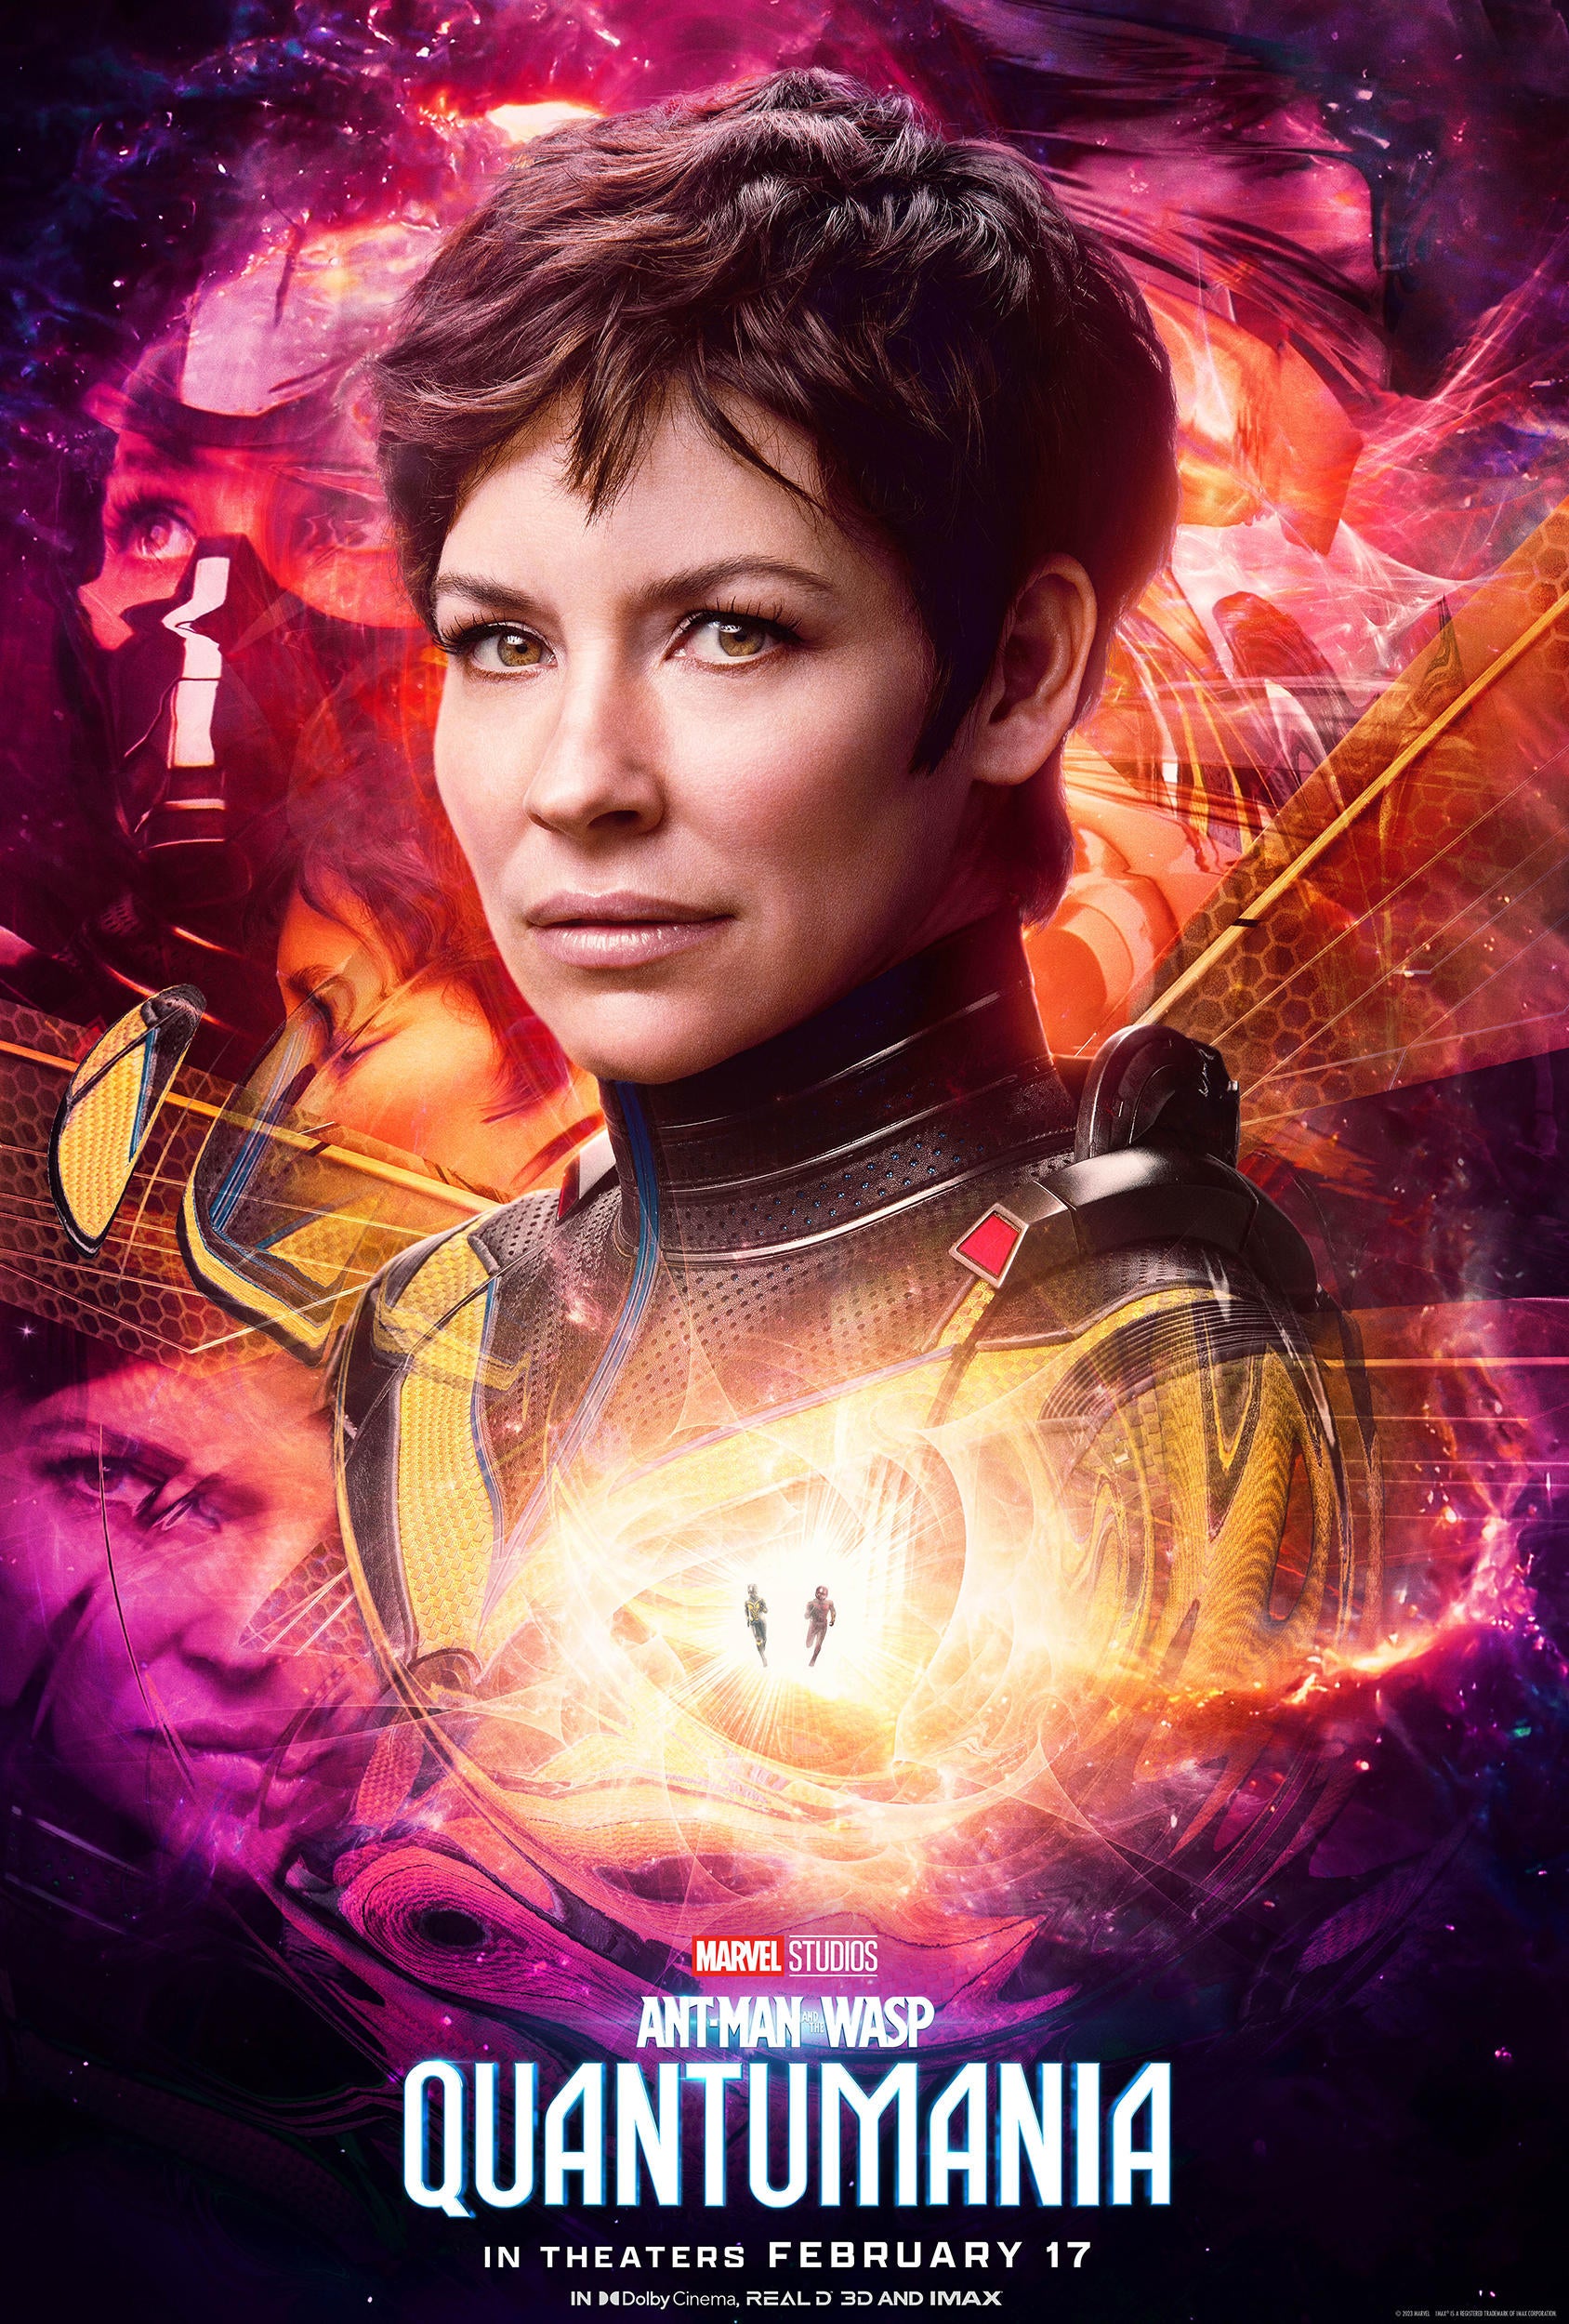 ant-man-and-the-wasp-quantumania-evangeline-lilly-poster.jpg